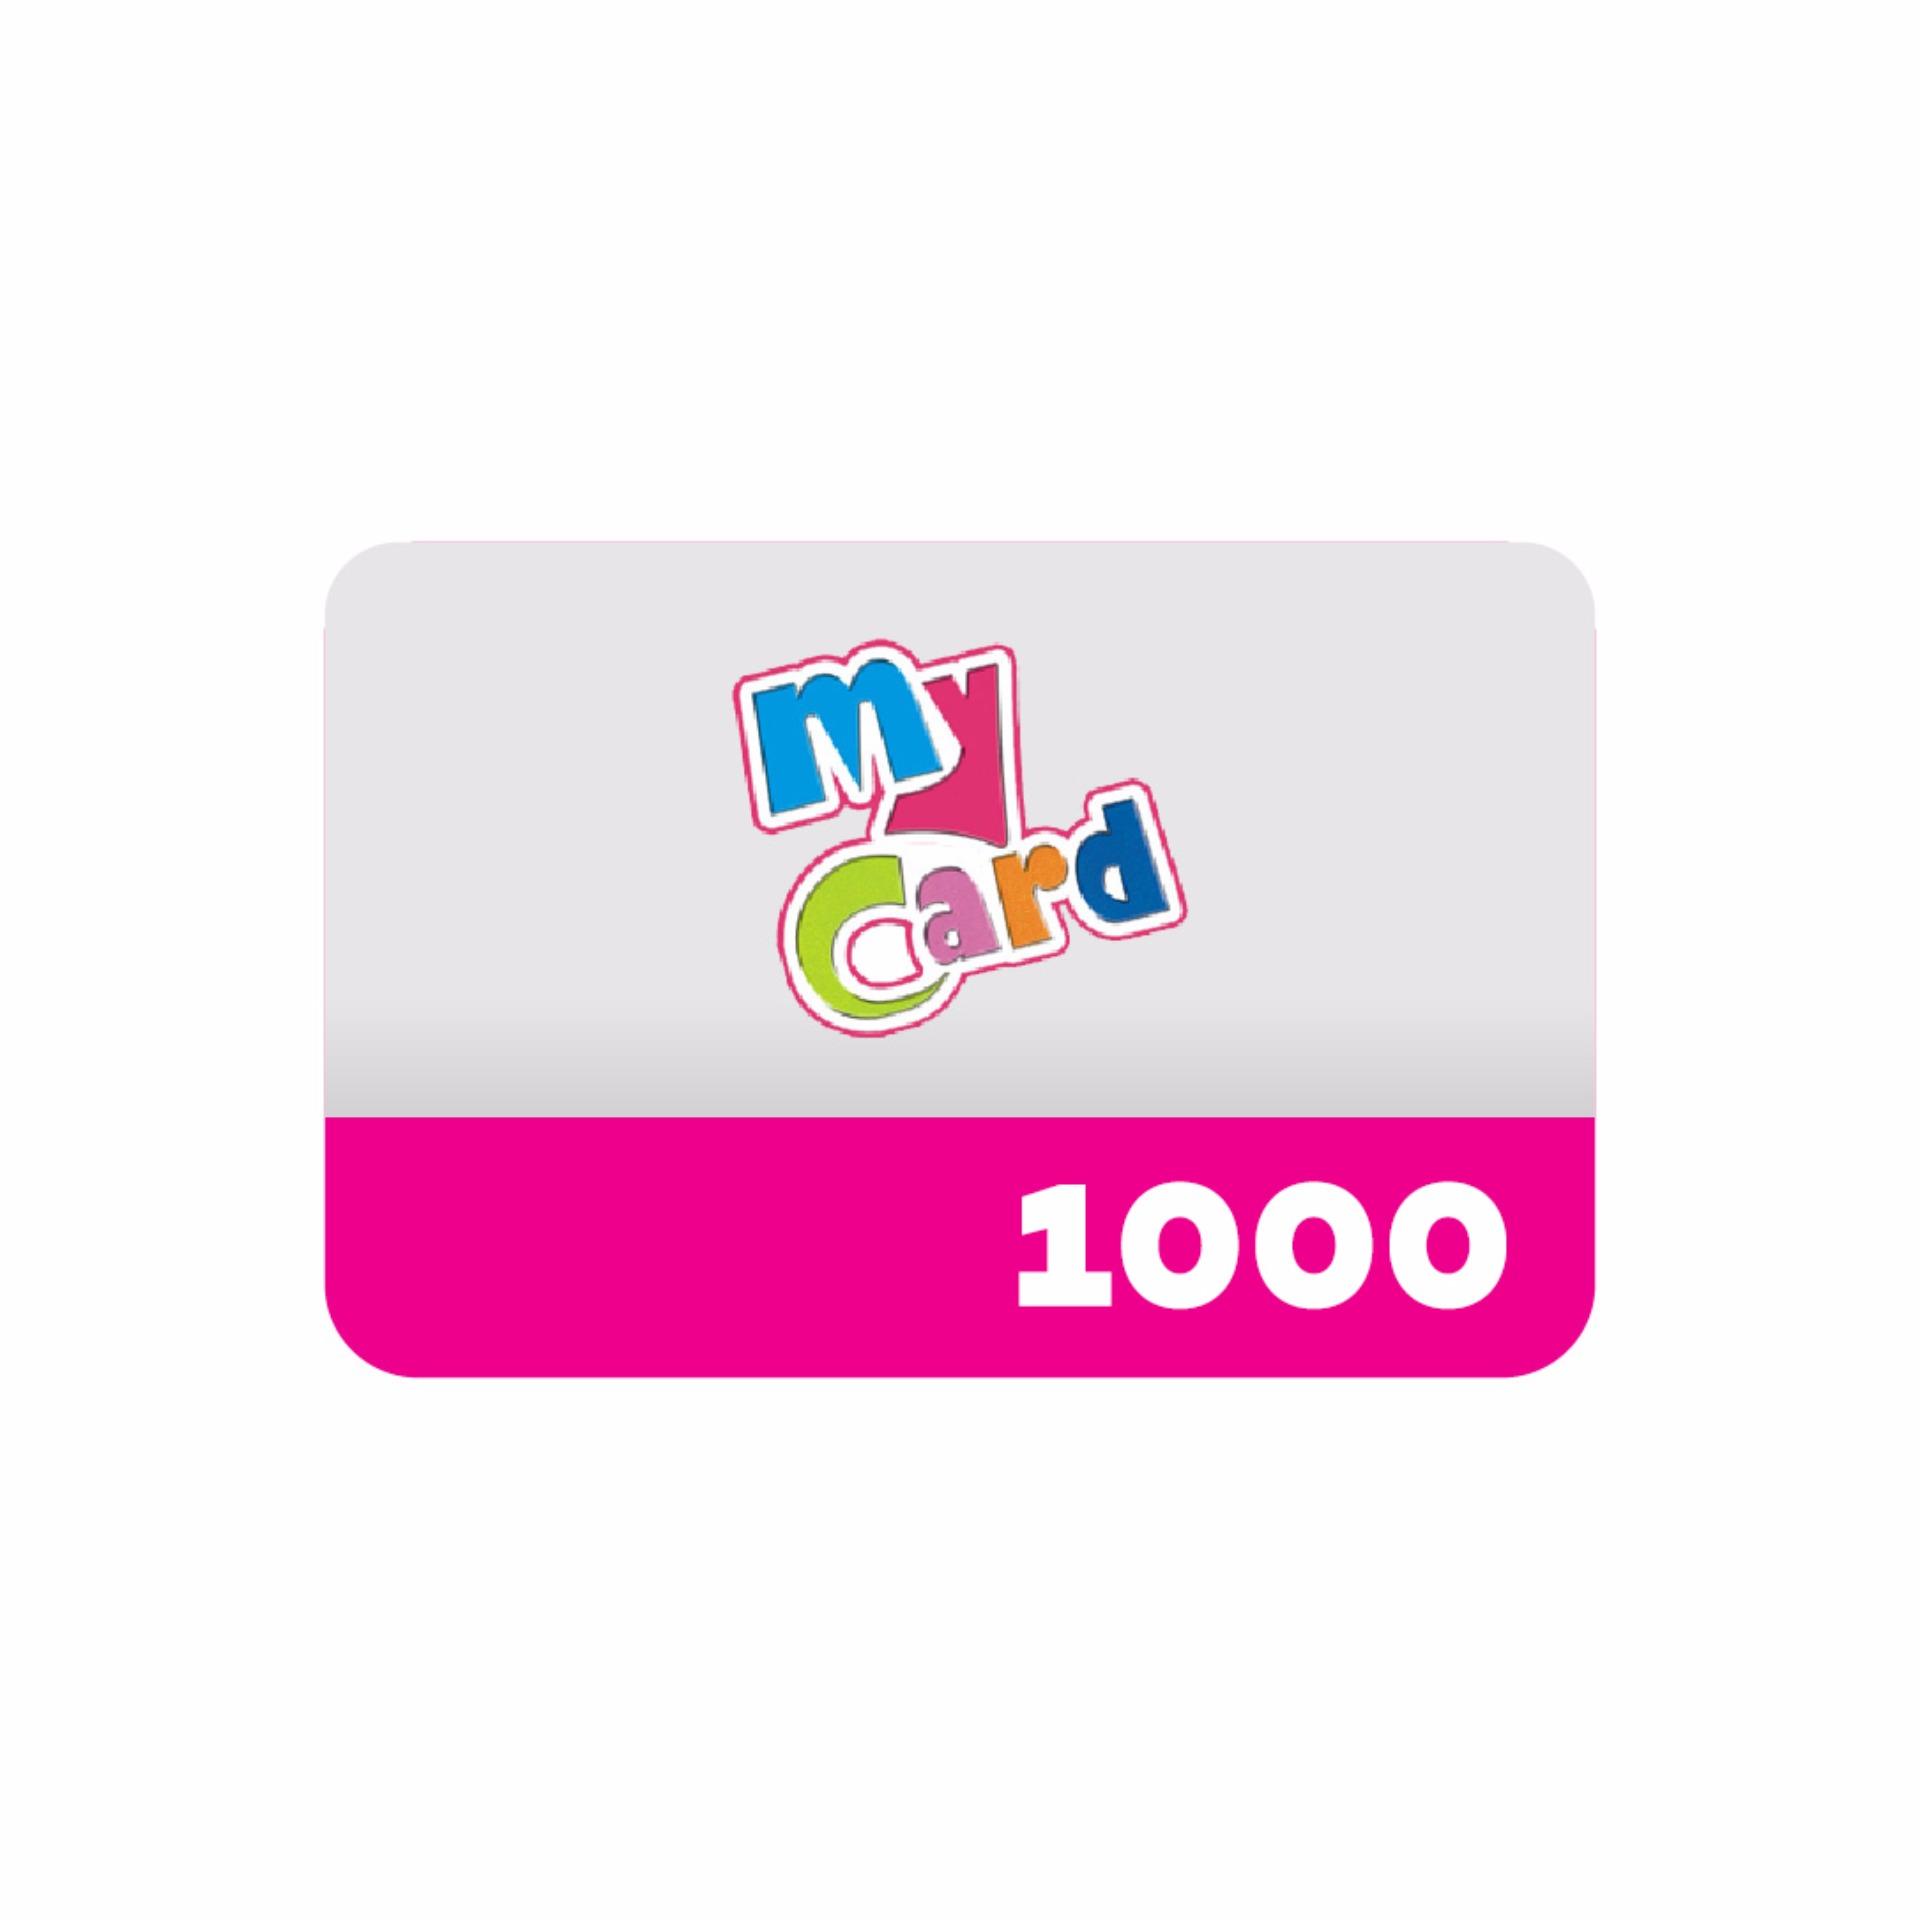 MyCard] 1000 Points/My Card/Games/Wallet/Credits/Gift Topup/PIN/Digital (Email Singapore